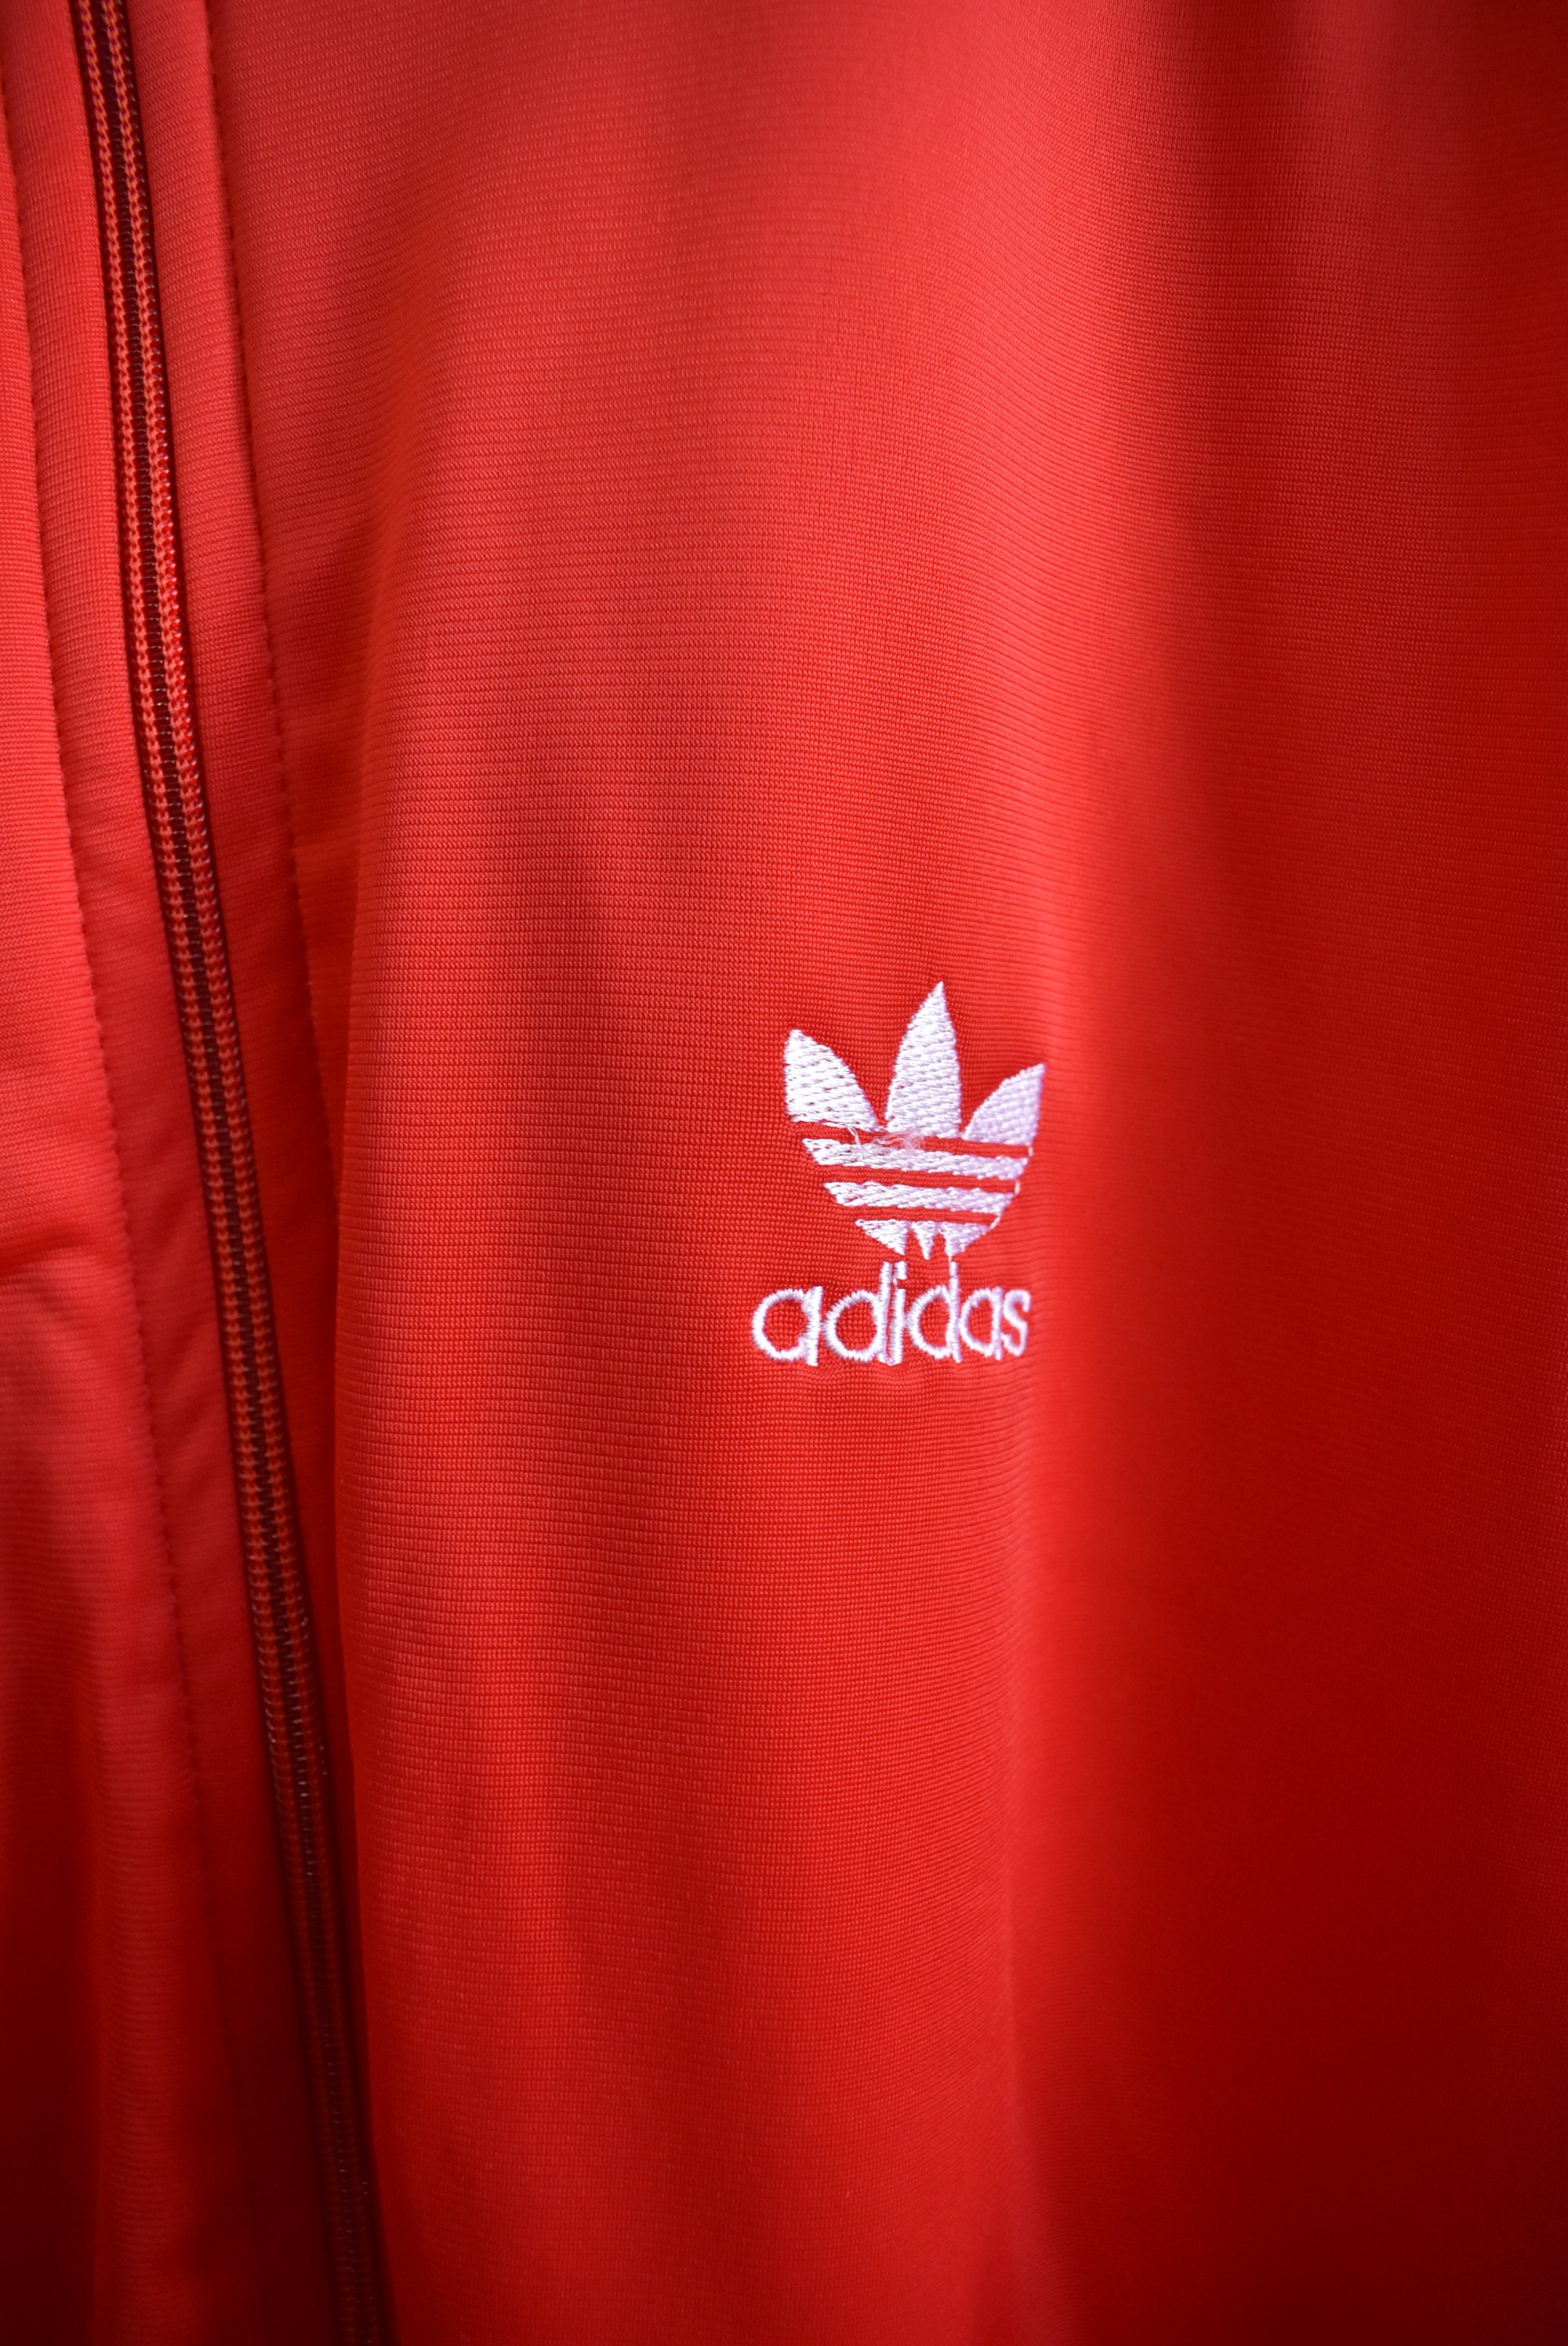 Vintage 1980s Adidas X Run DMC DEADSTOCK Red Track Suit Jacket - Etsy